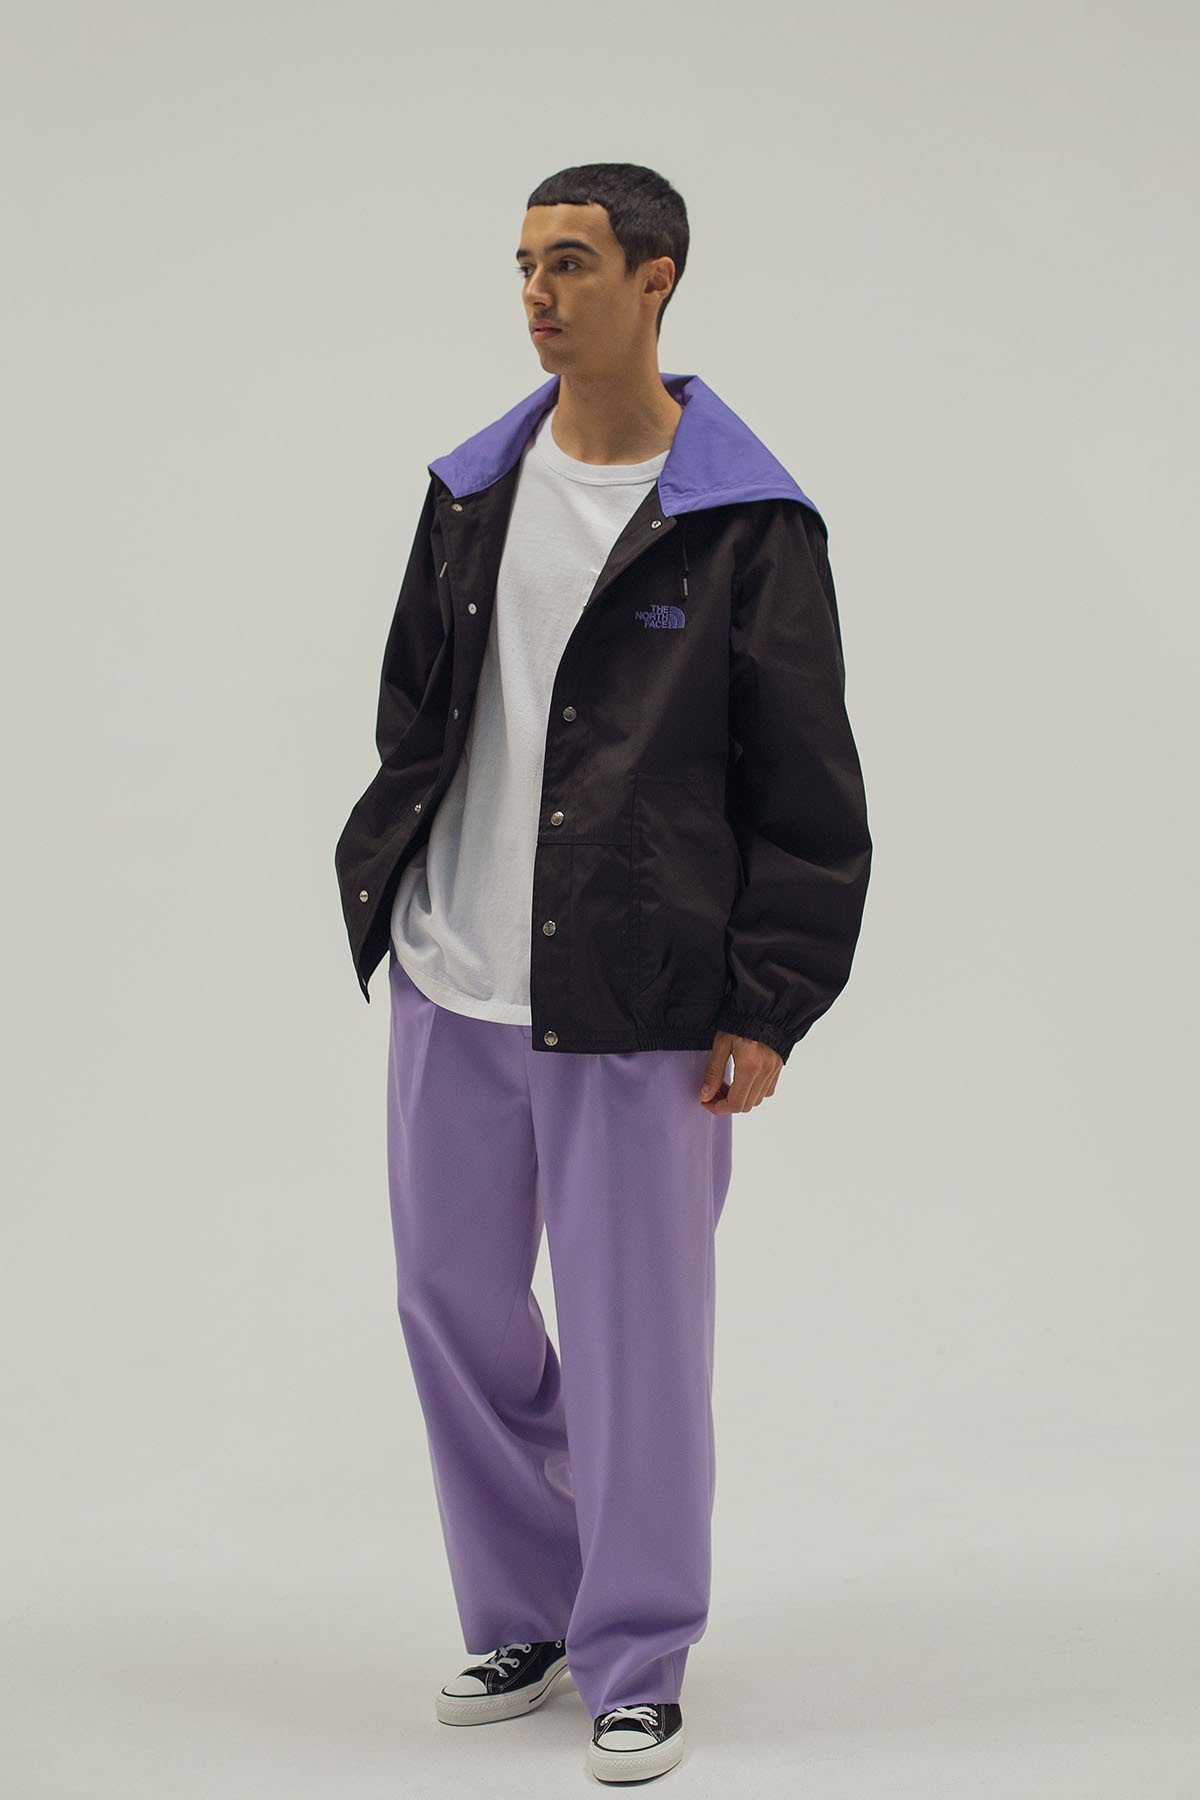 monkey time and The North Face Purple Label Link Up for SS22 